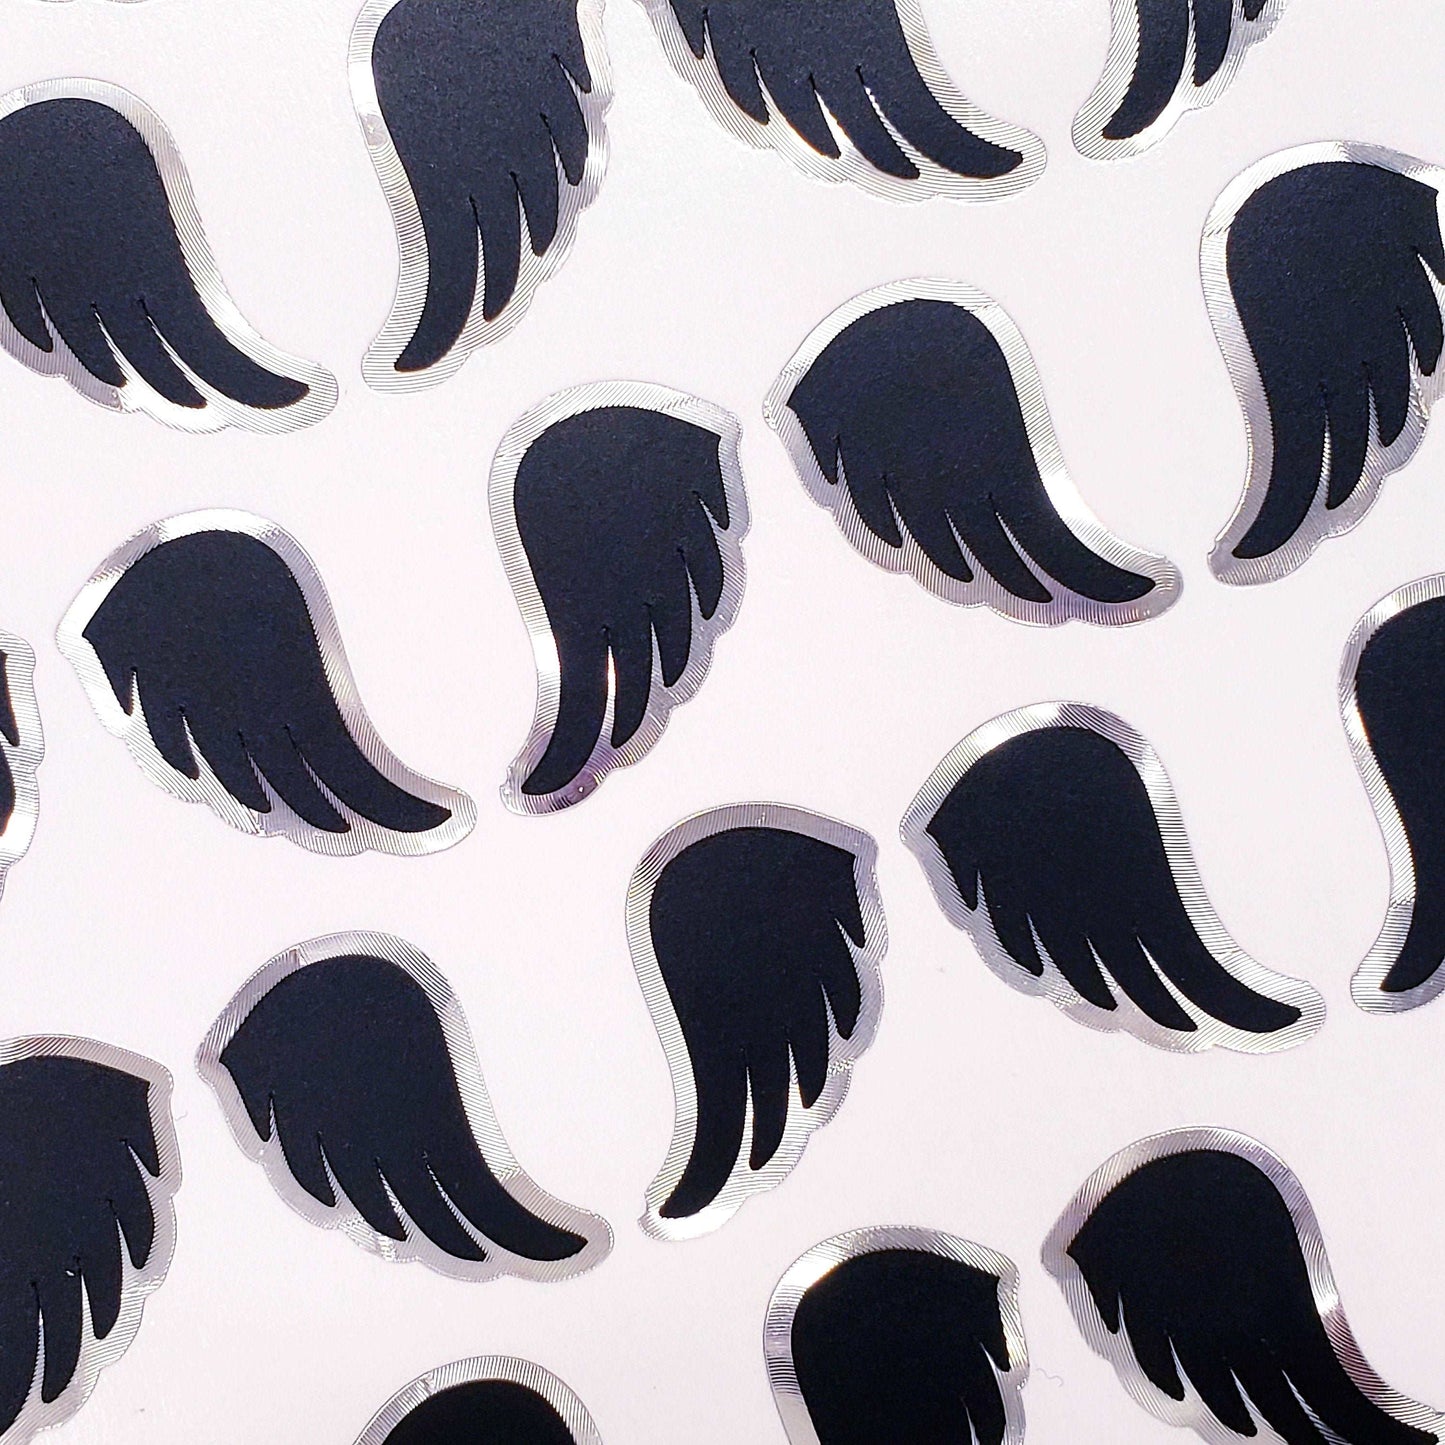 Black Angel Wing Stickers, set of 42 black and silver wing stickers for invitations, envelopes, notecards, planners, journals and crafts.